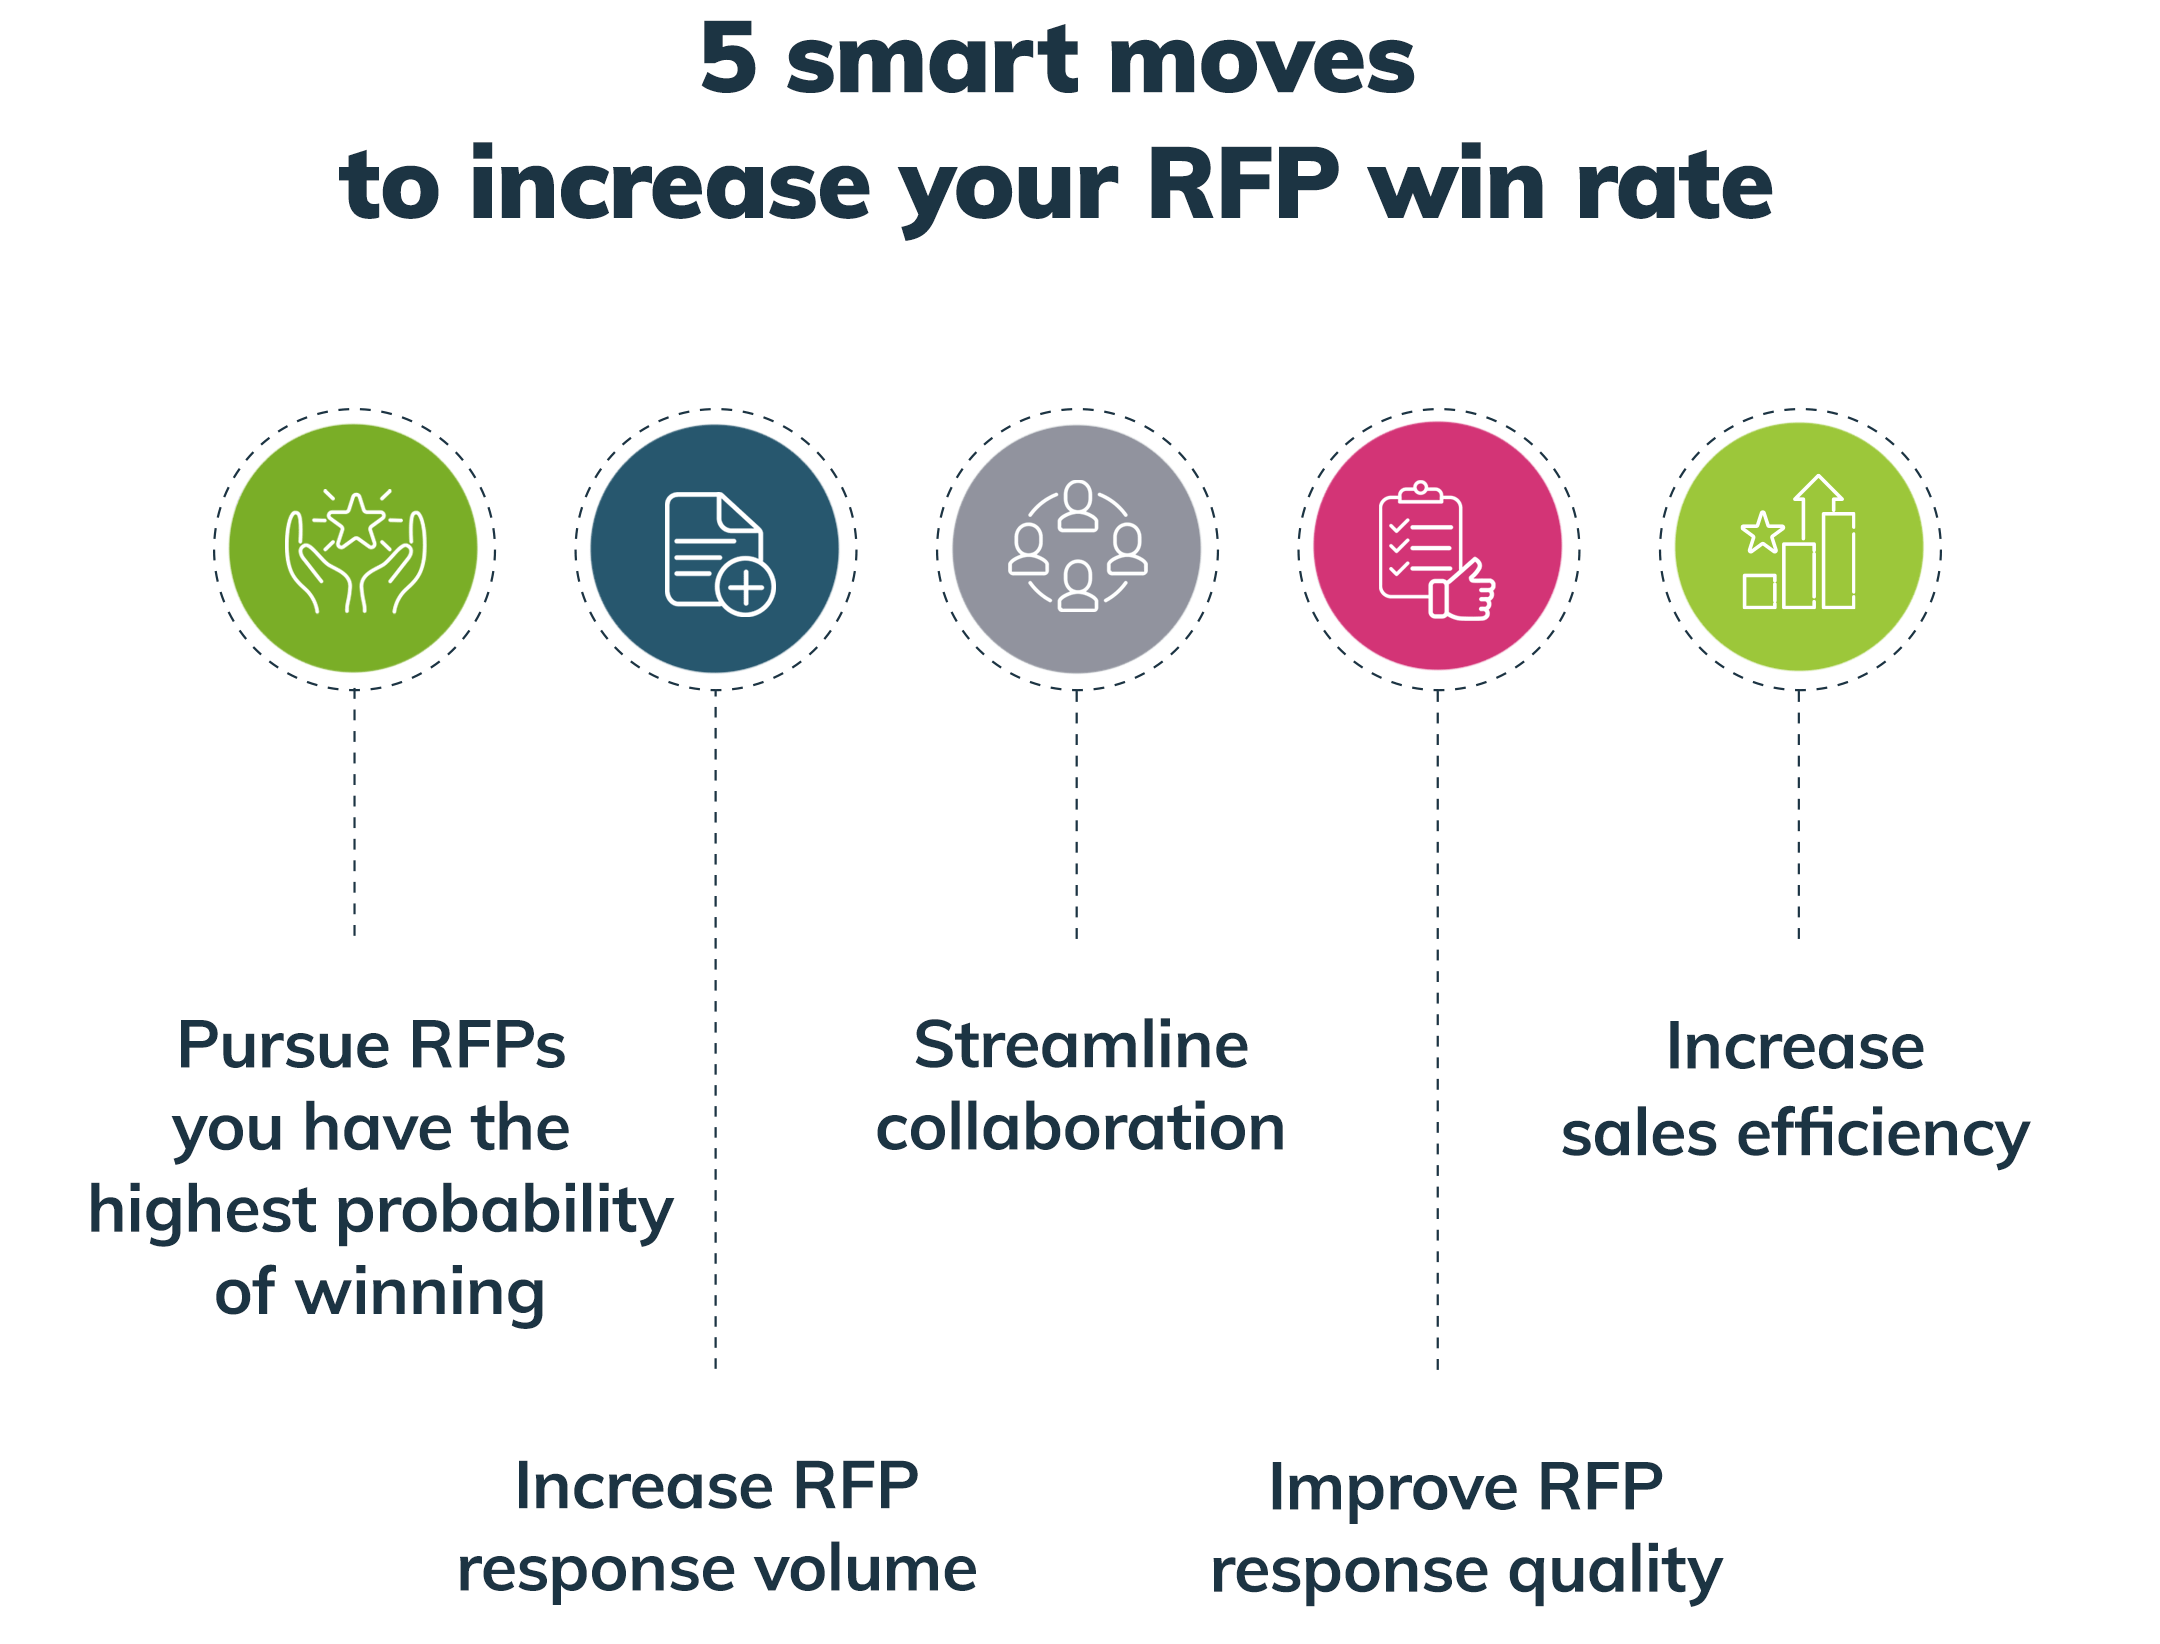 5 smart moves to increase your RFP win rate